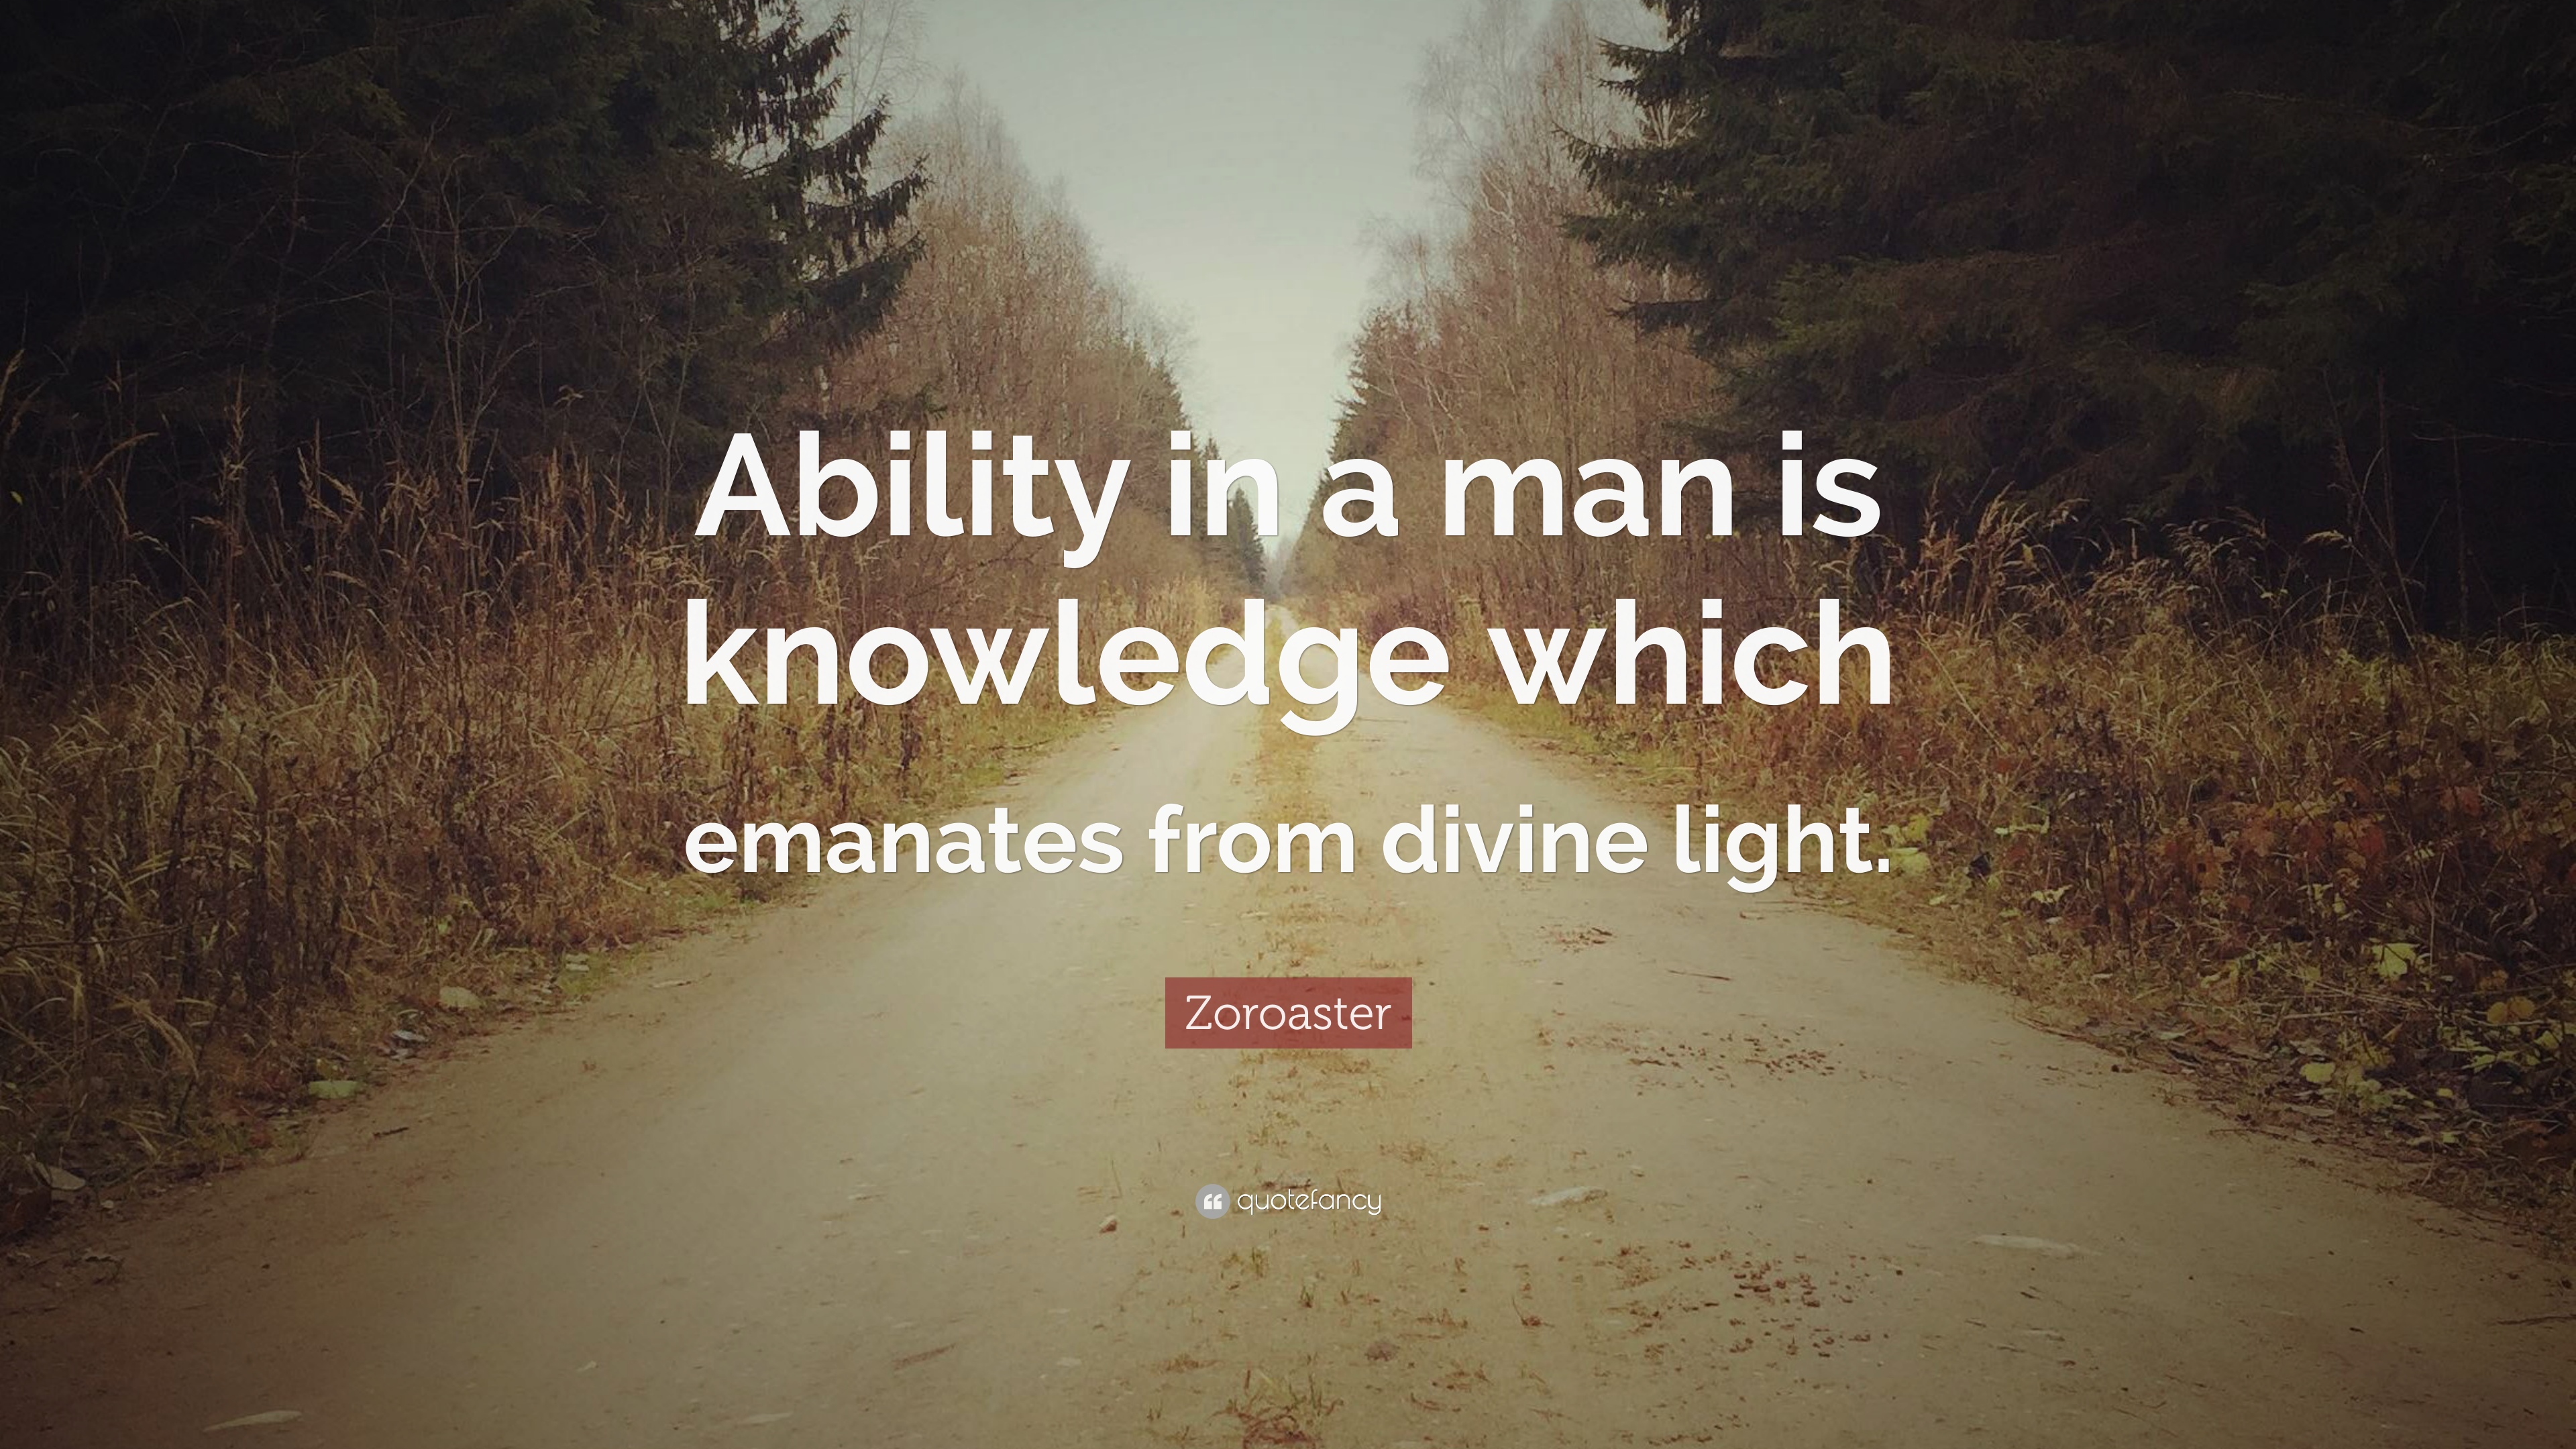 Zoroaster Quote: “Ability in a man is knowledge which